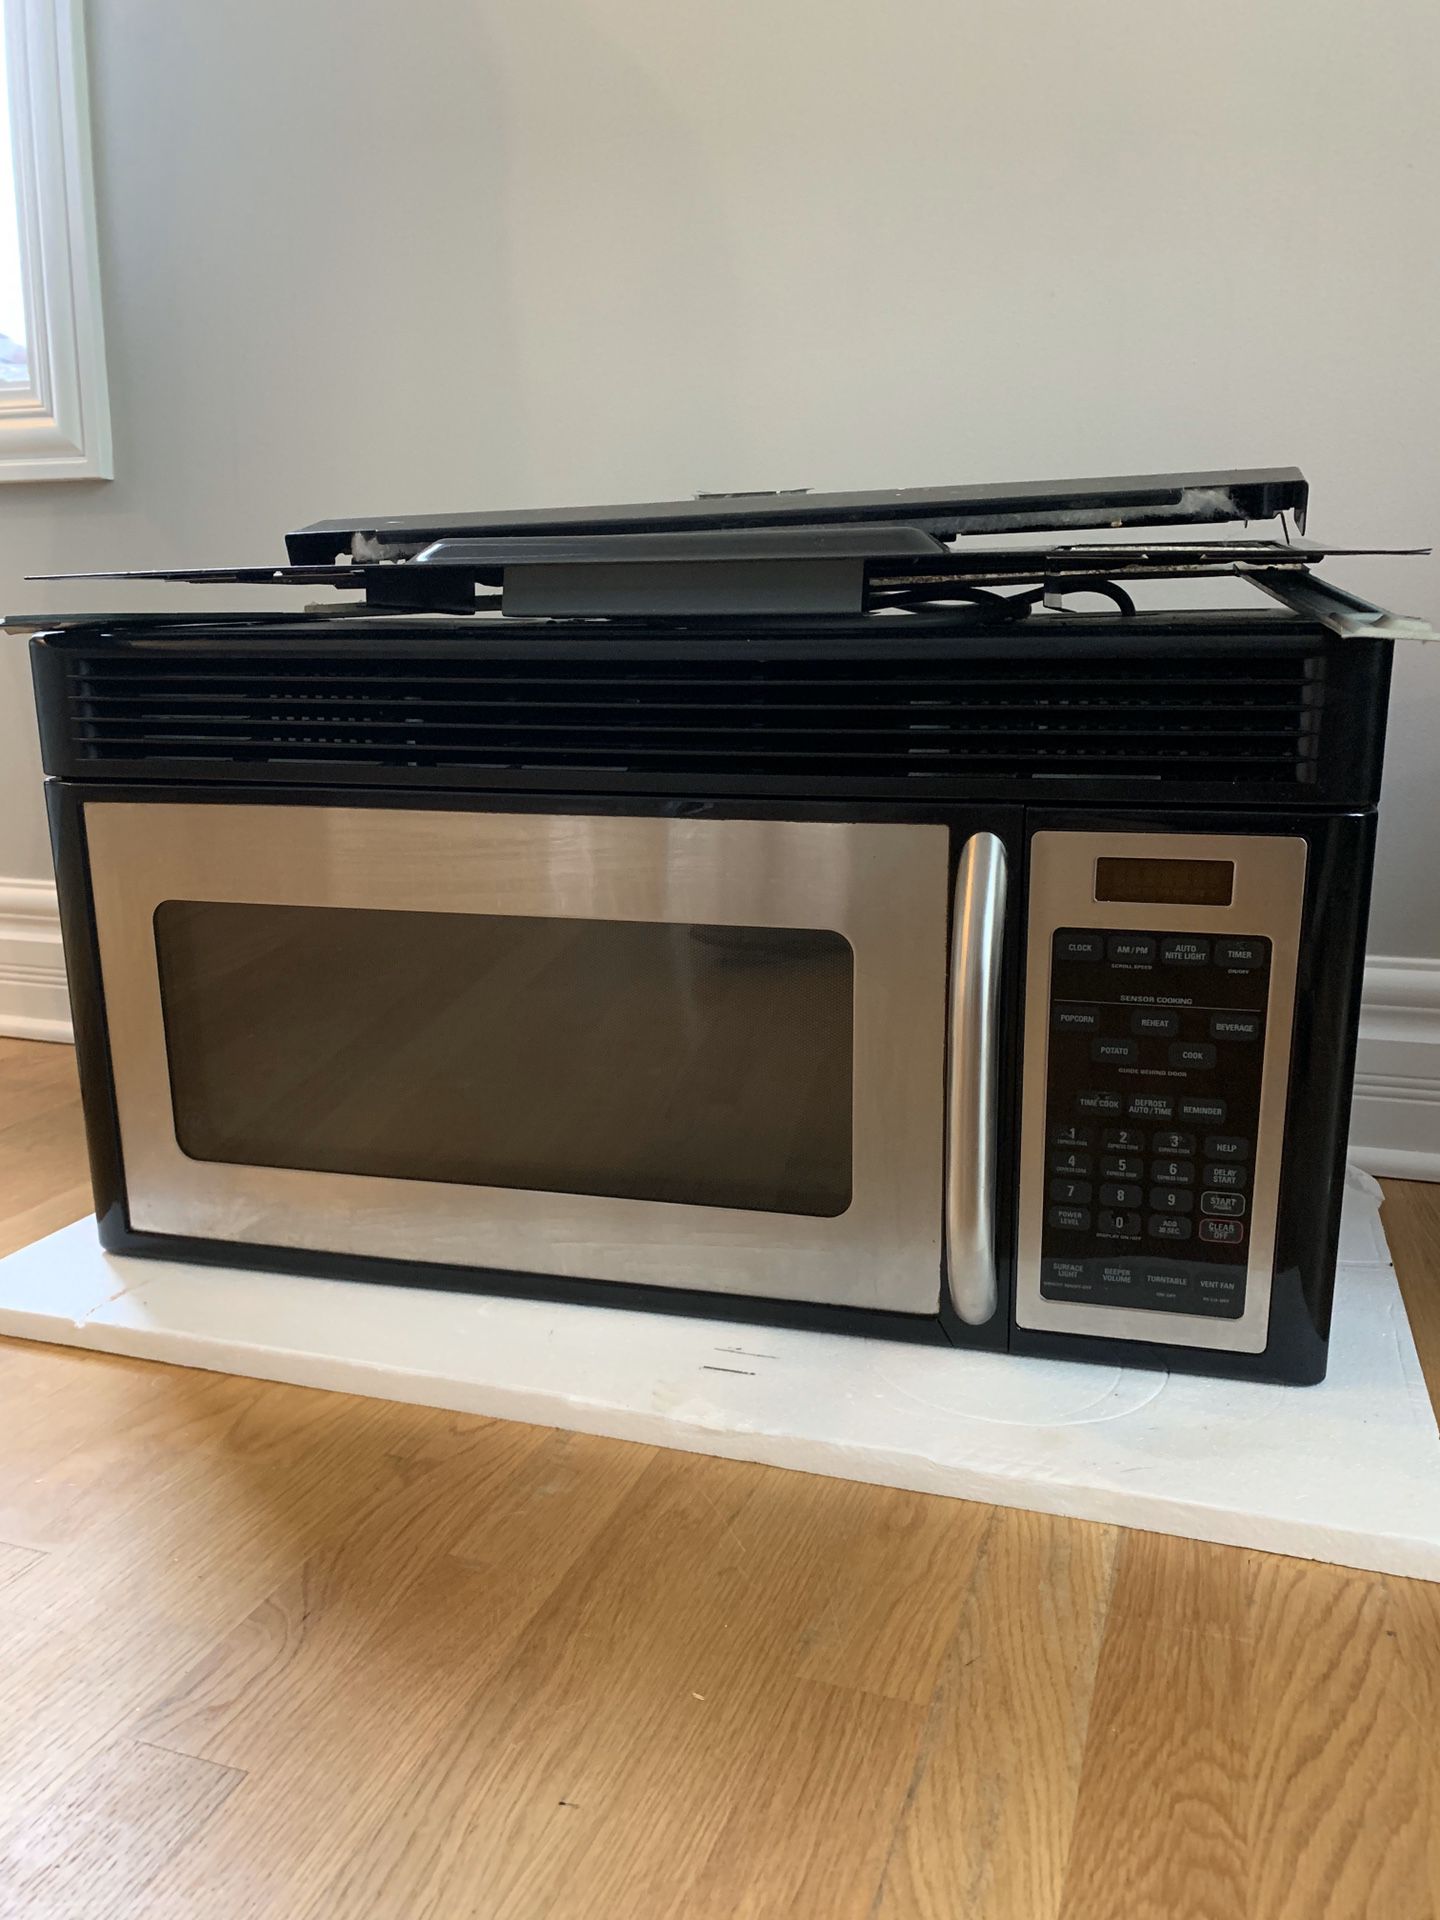 GE Microwave - Sept. 2006 - Stainless Steel - Works Great